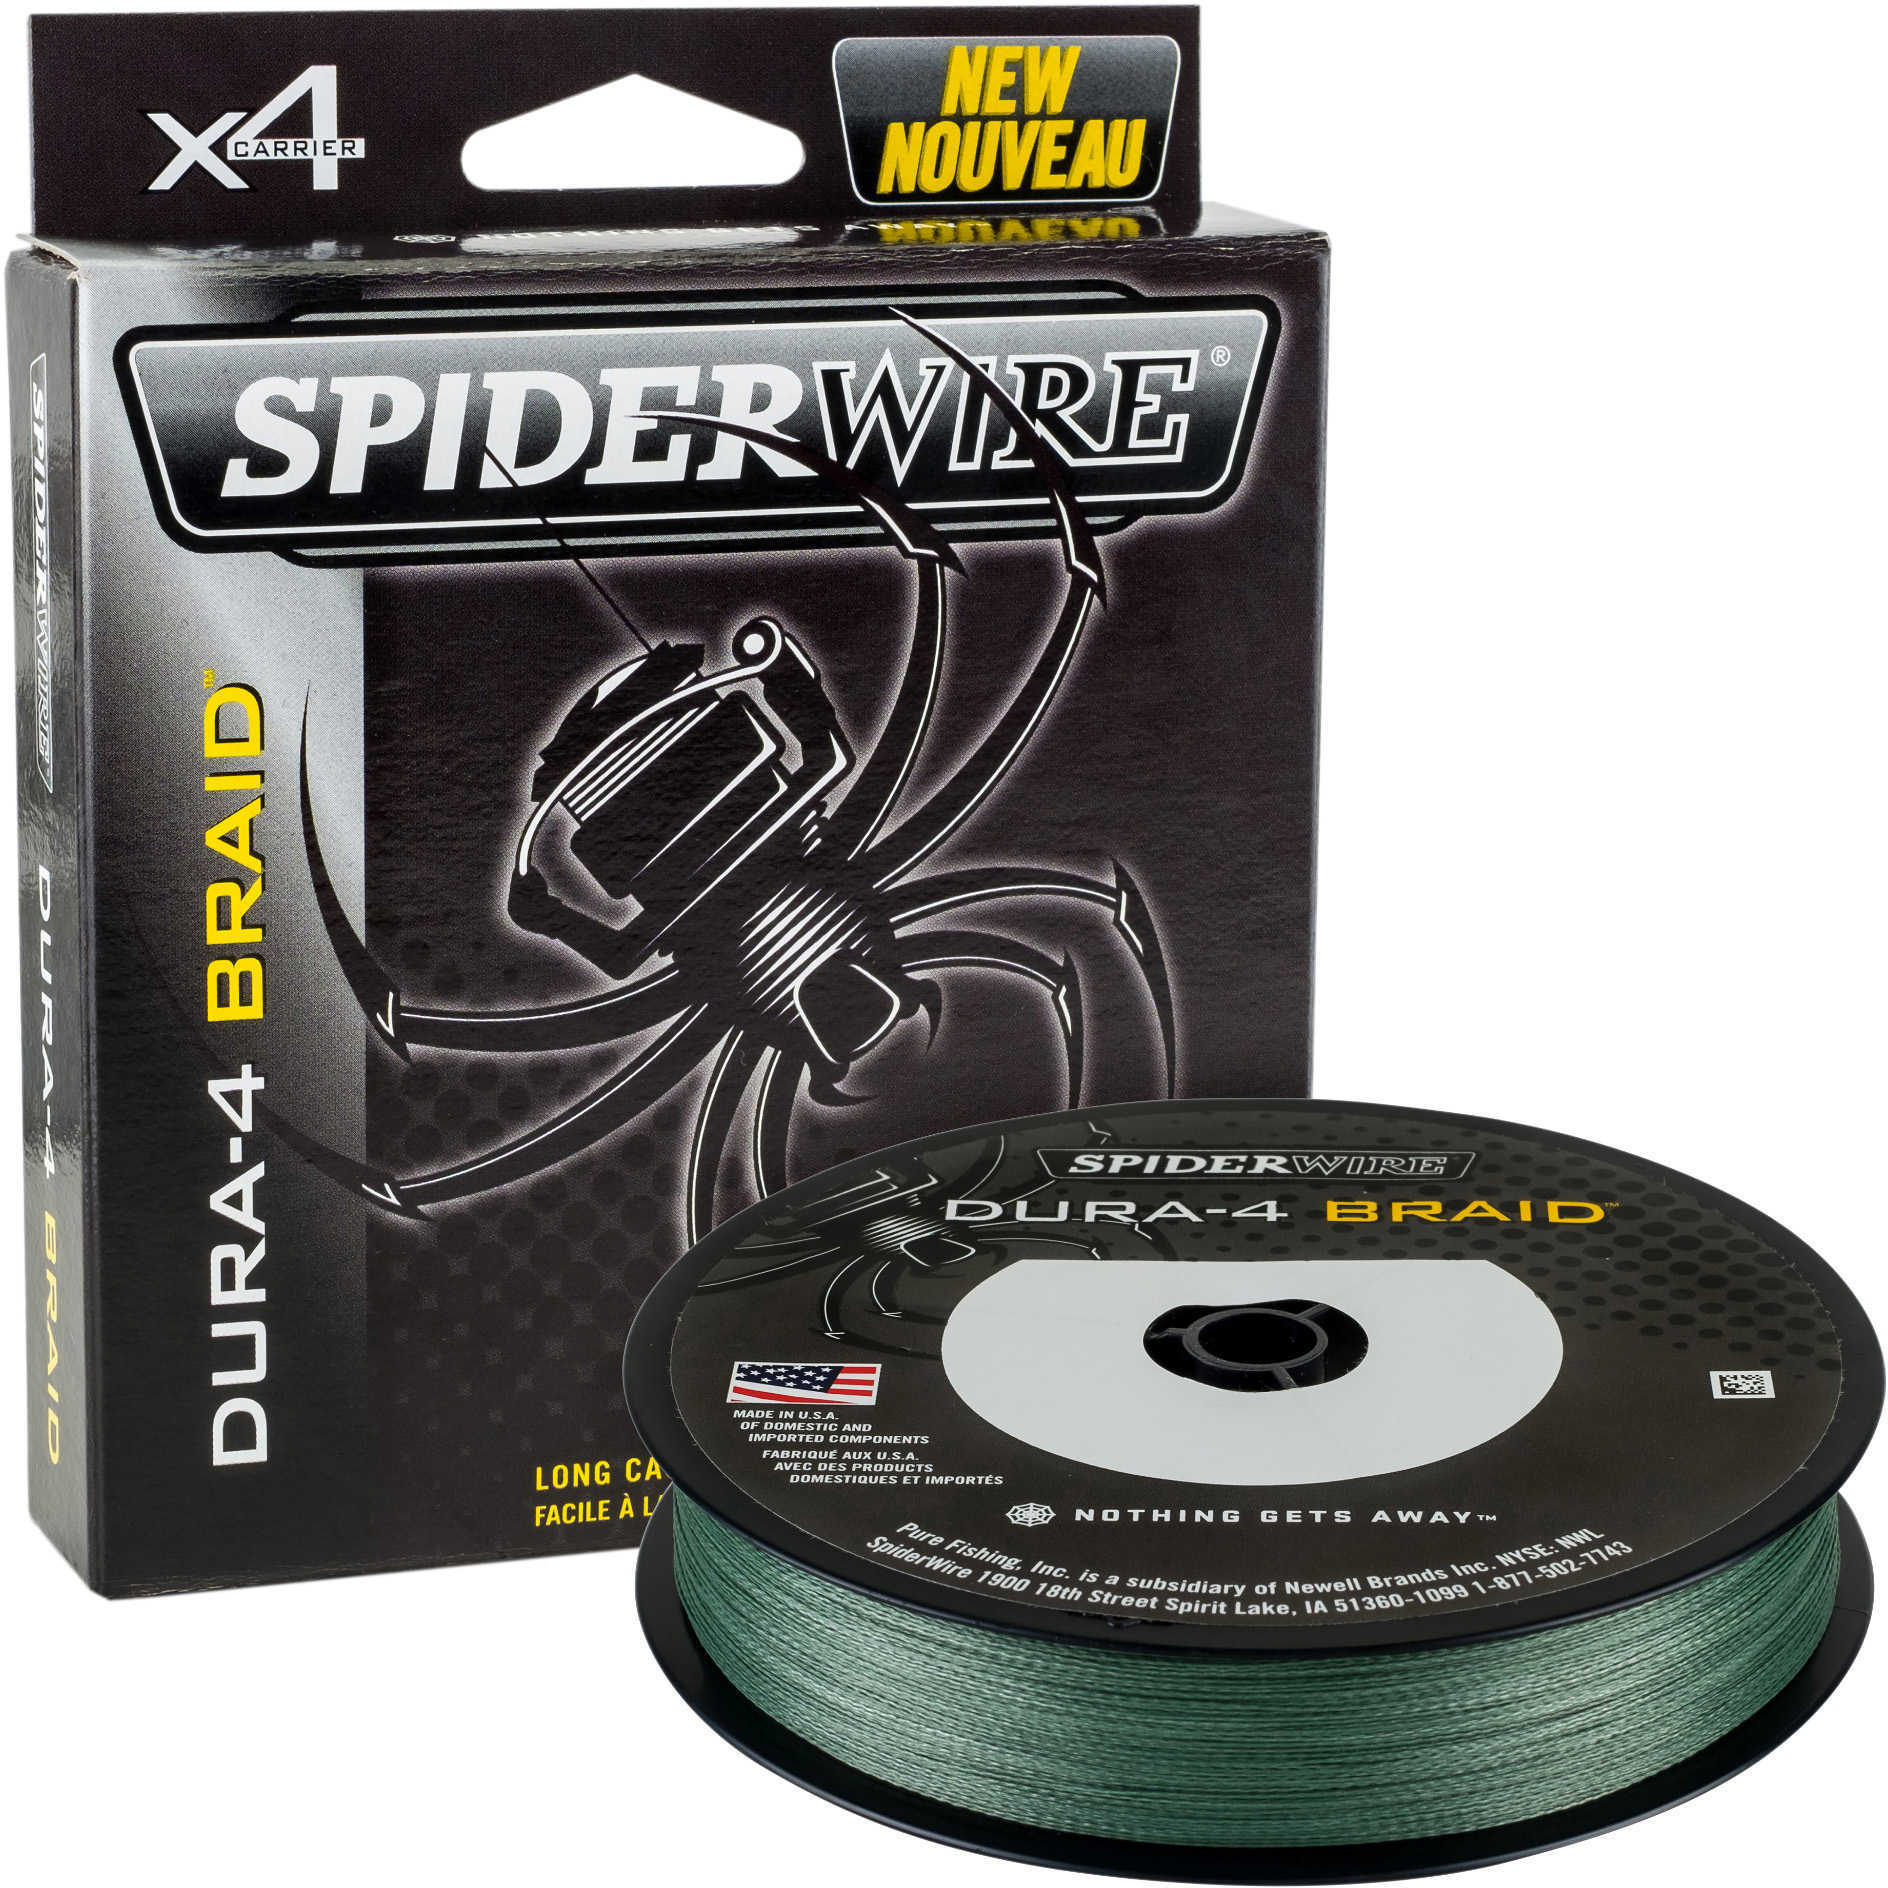 Spiderwire Dura-4 Braided Line 300 Yards , 10 lbs Tested, 0.008" Diameter, Moss Green